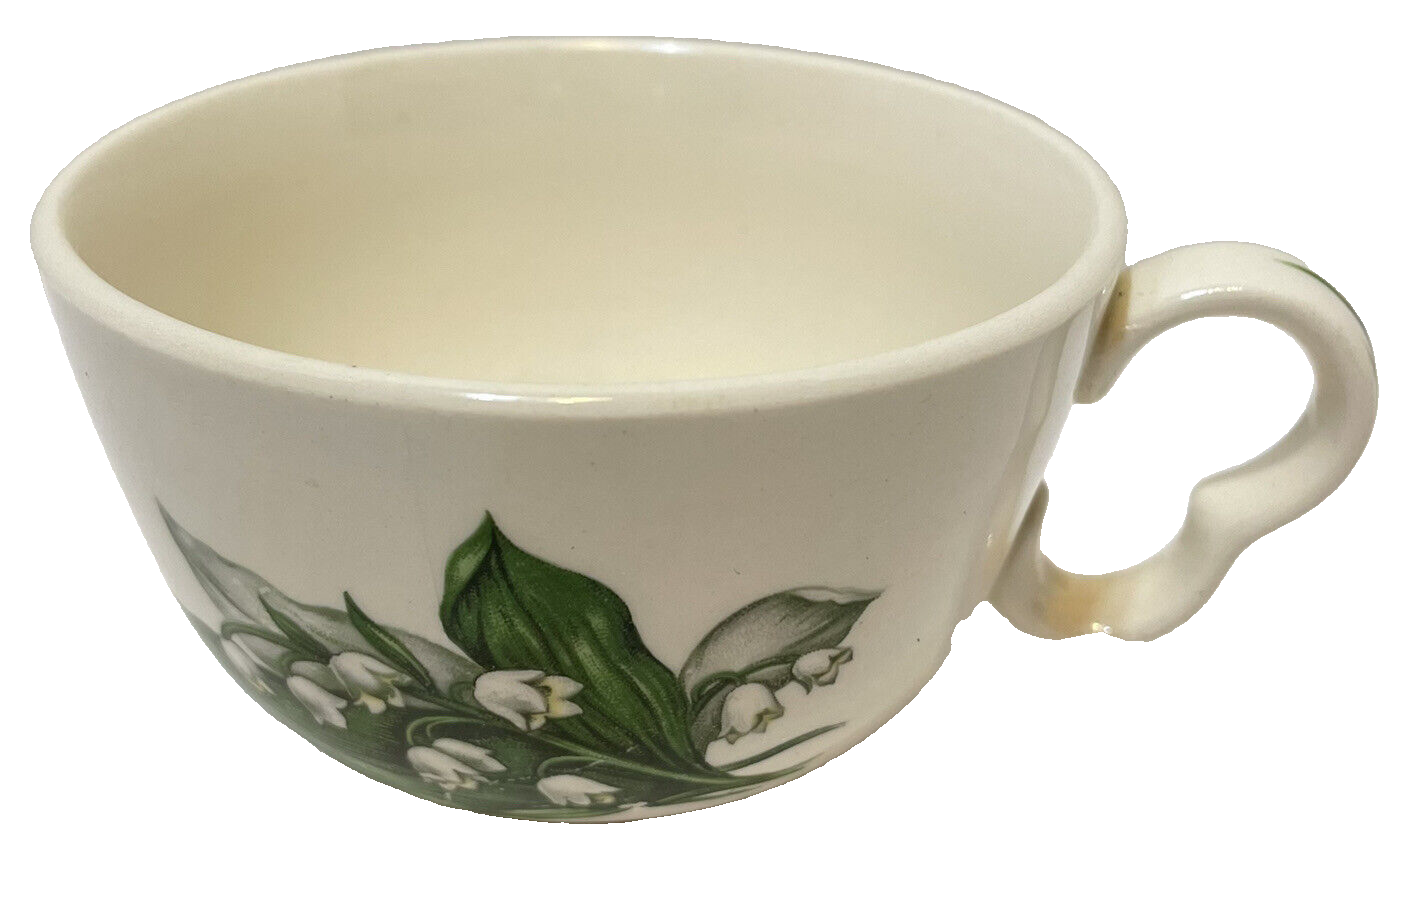 Primary image for Vintage China Tea Coffee Cup Lily of the Valley 2.25" Tall 3.75" Diameter